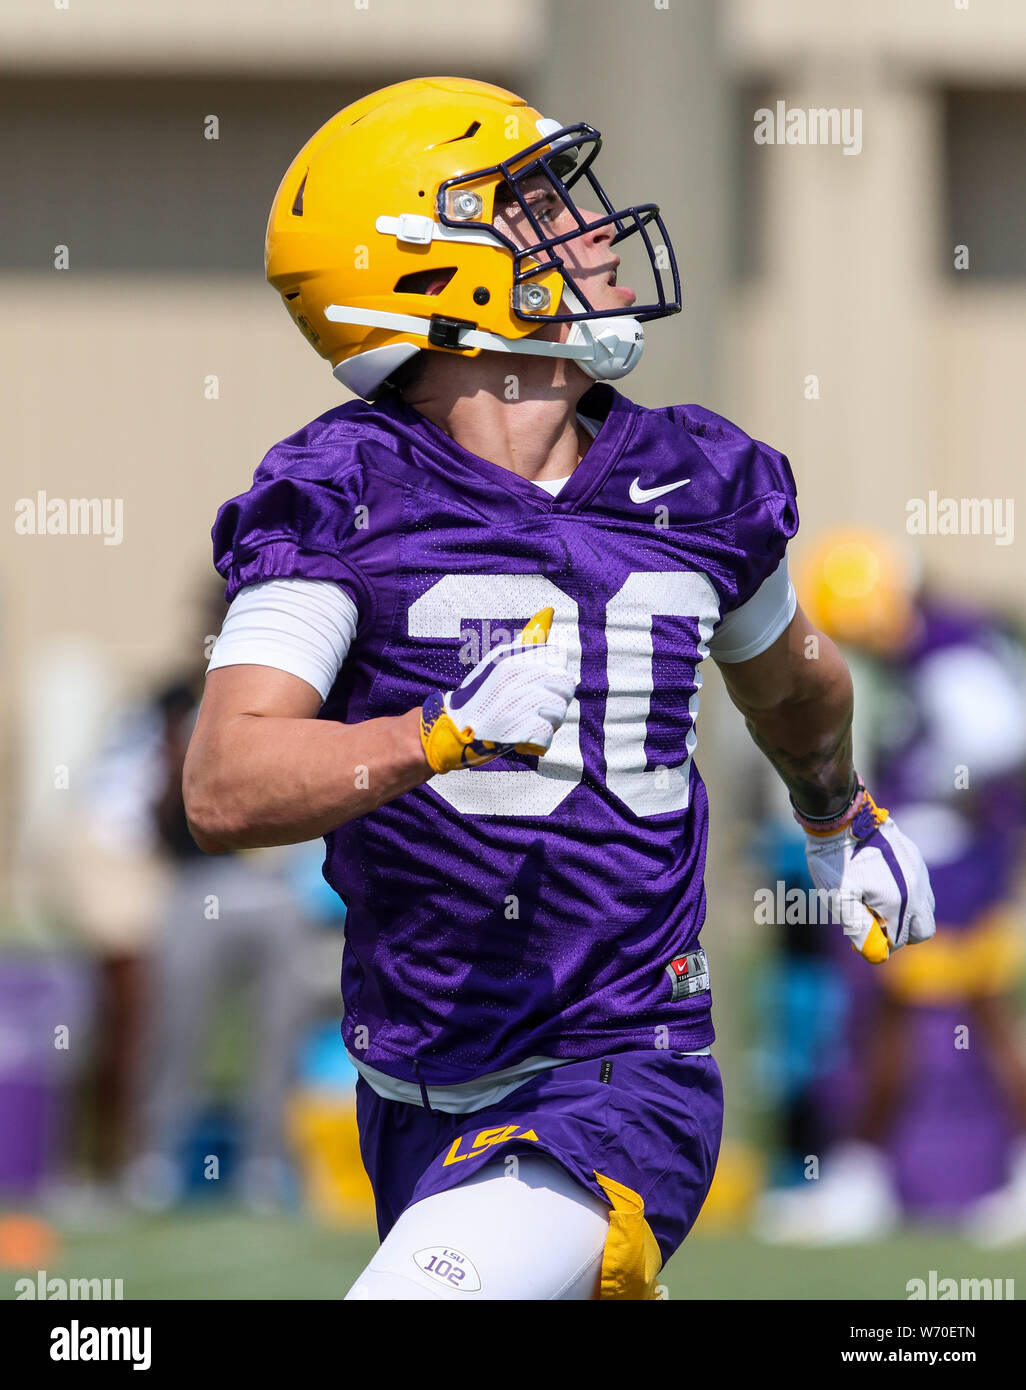 August 3, 2019: LSU defensive back Cade Comeaux (30) tracks a ball that was thrown his way during practice at the Charles McClendon Practice Facility in Baton Rouge, LA. Jonathan Mailhes/CSM Stock Photo